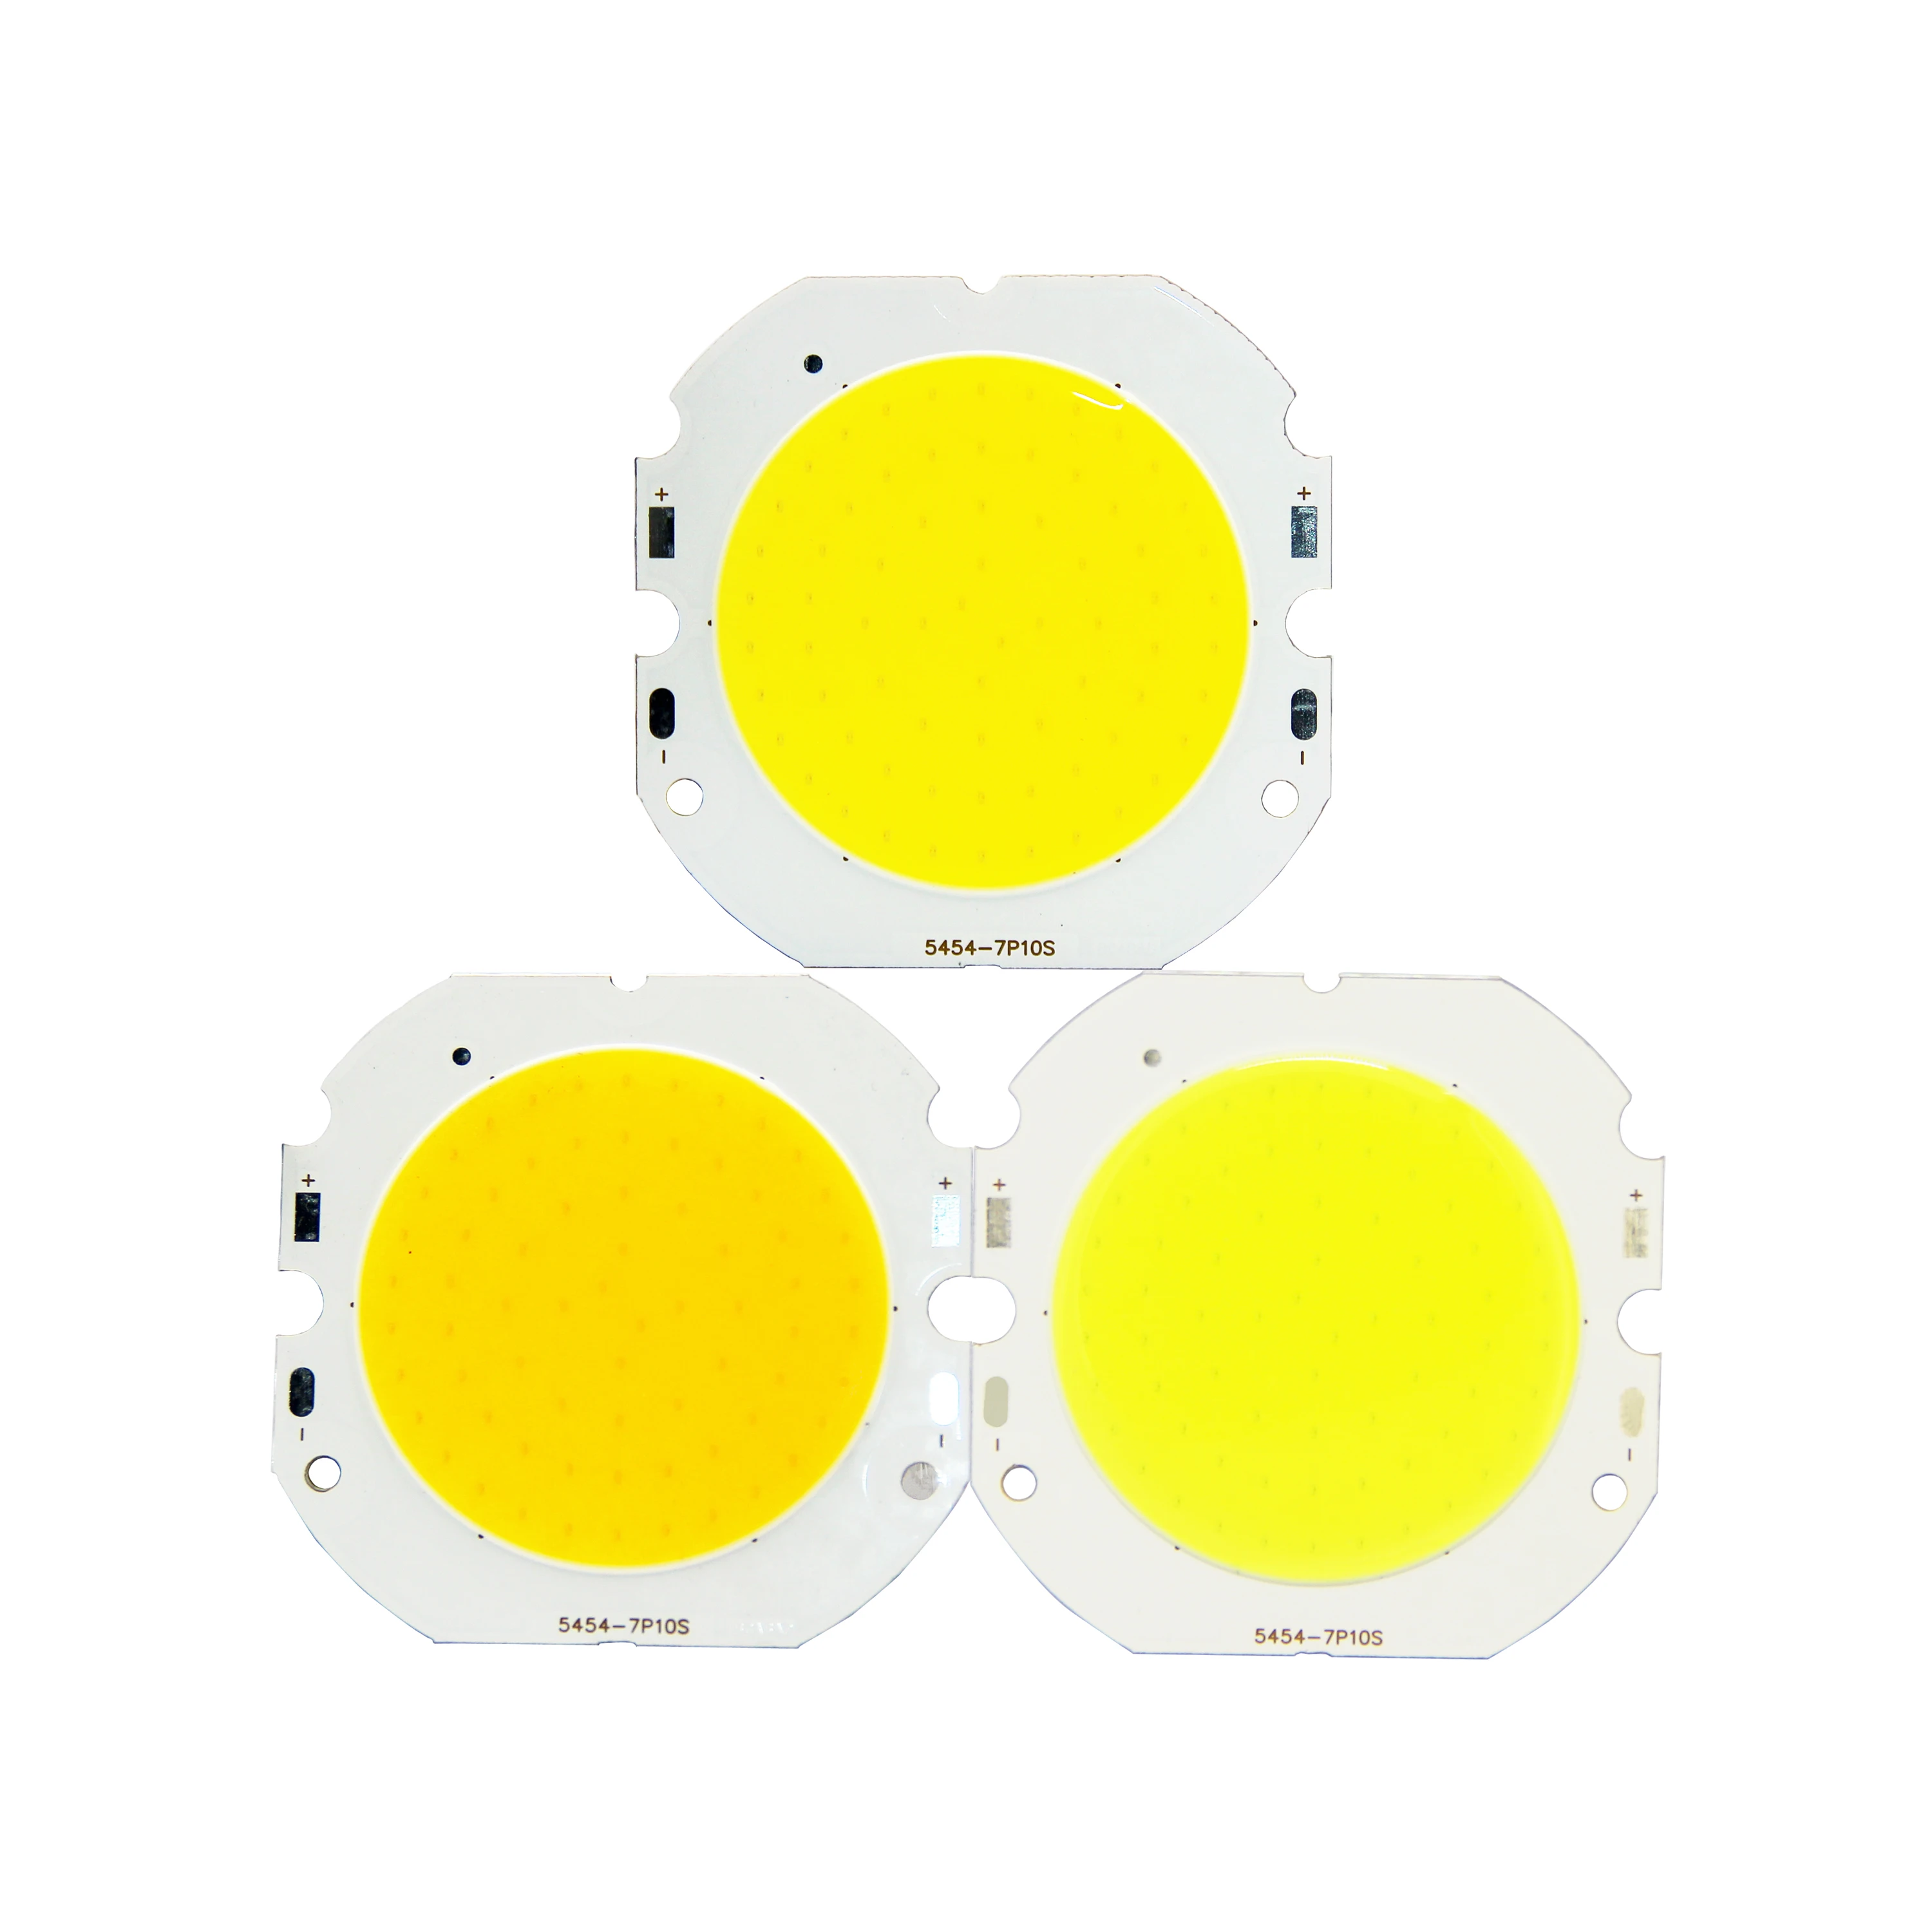 

30W Luminous Area Size 42mm Round Led Cob Light Source for Down Light Lamp DC 30V-33V 900mA Natural Warm Cold White Color